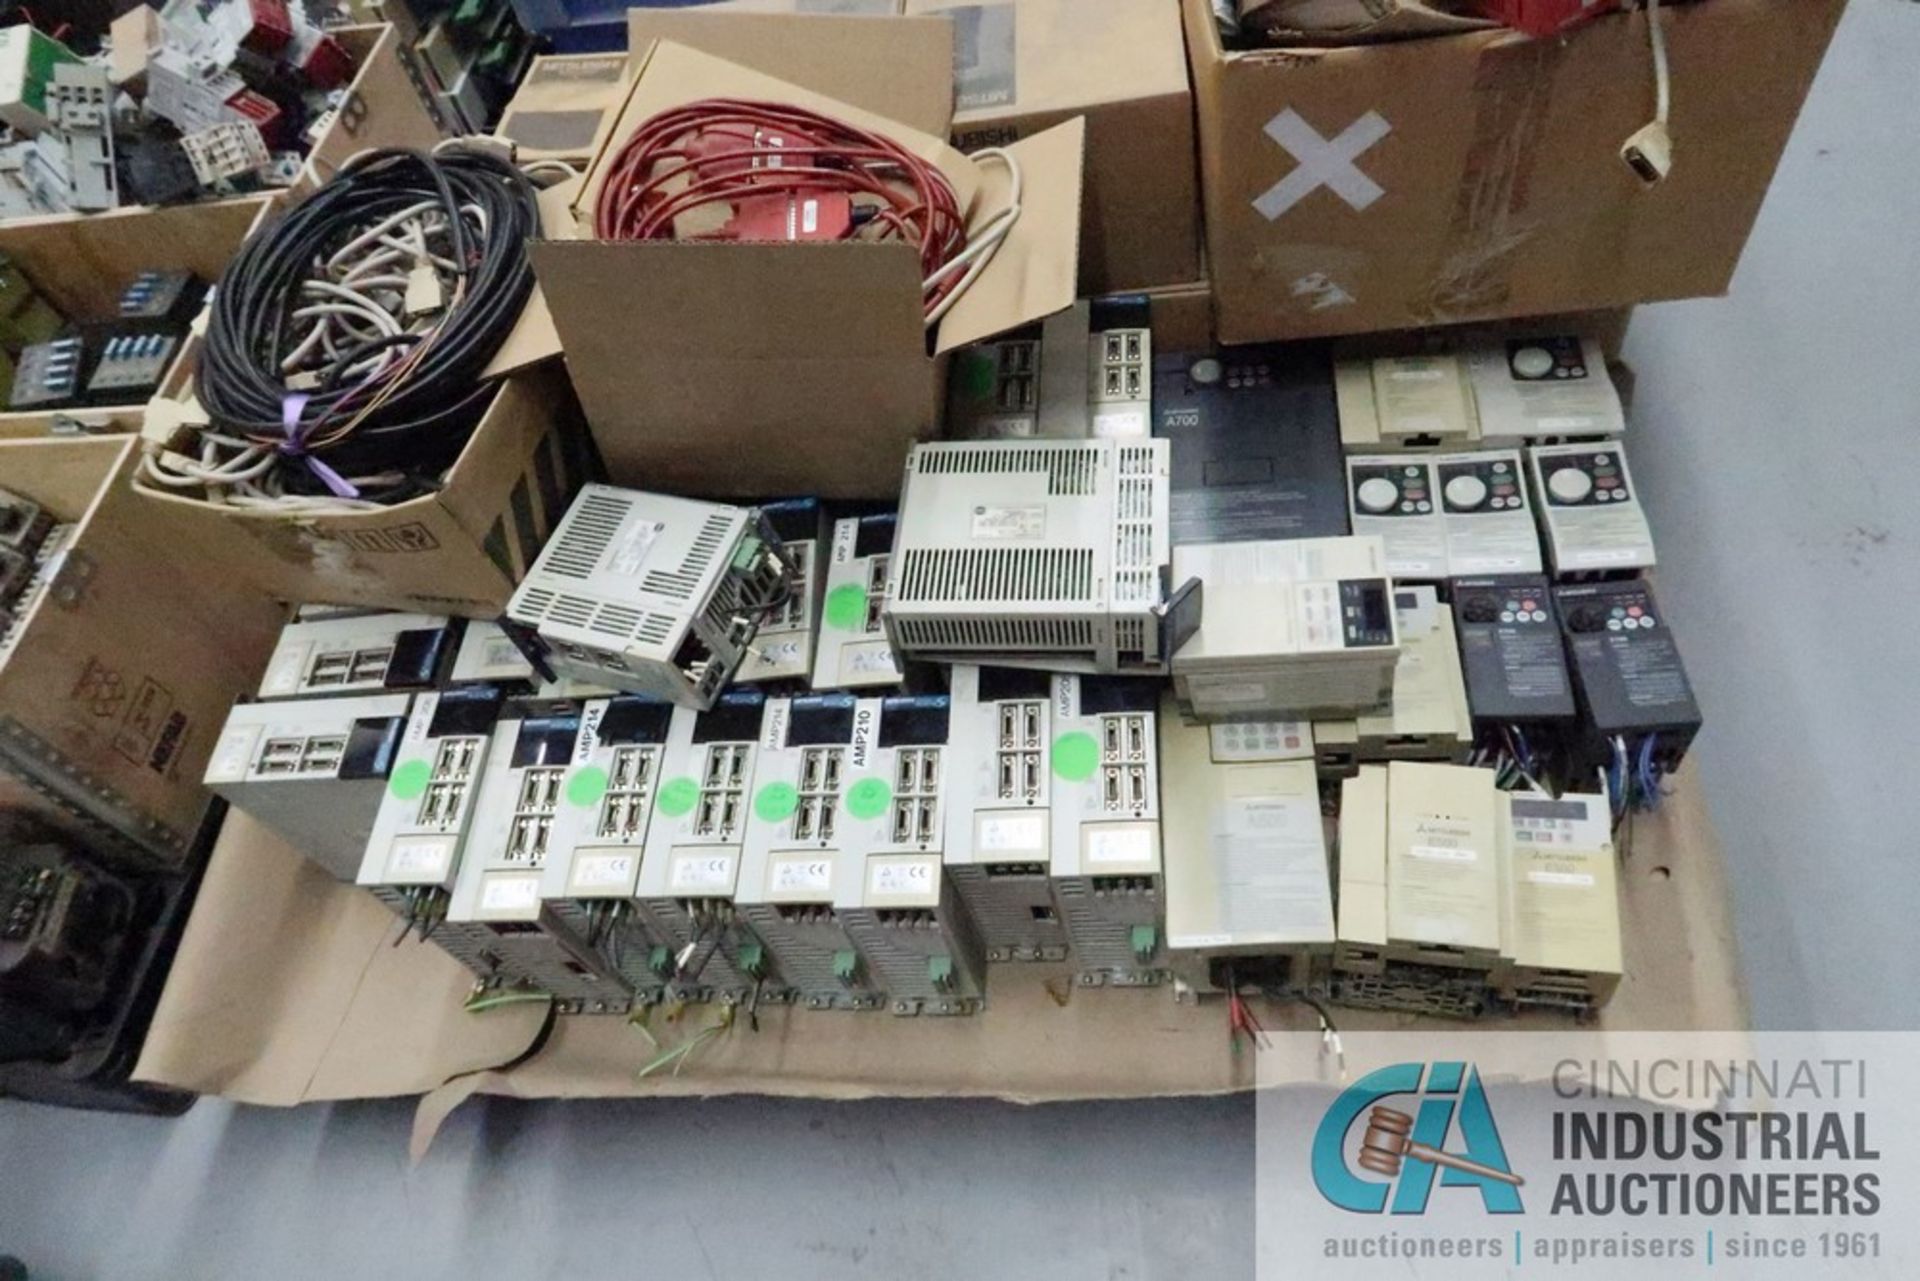 (LOT) (4) SKIDS MISC. ELECTRONIC BOARDS, SERVO MOTORS, MODULES, INVERTERS, POWER SUPPLIES - Image 9 of 13